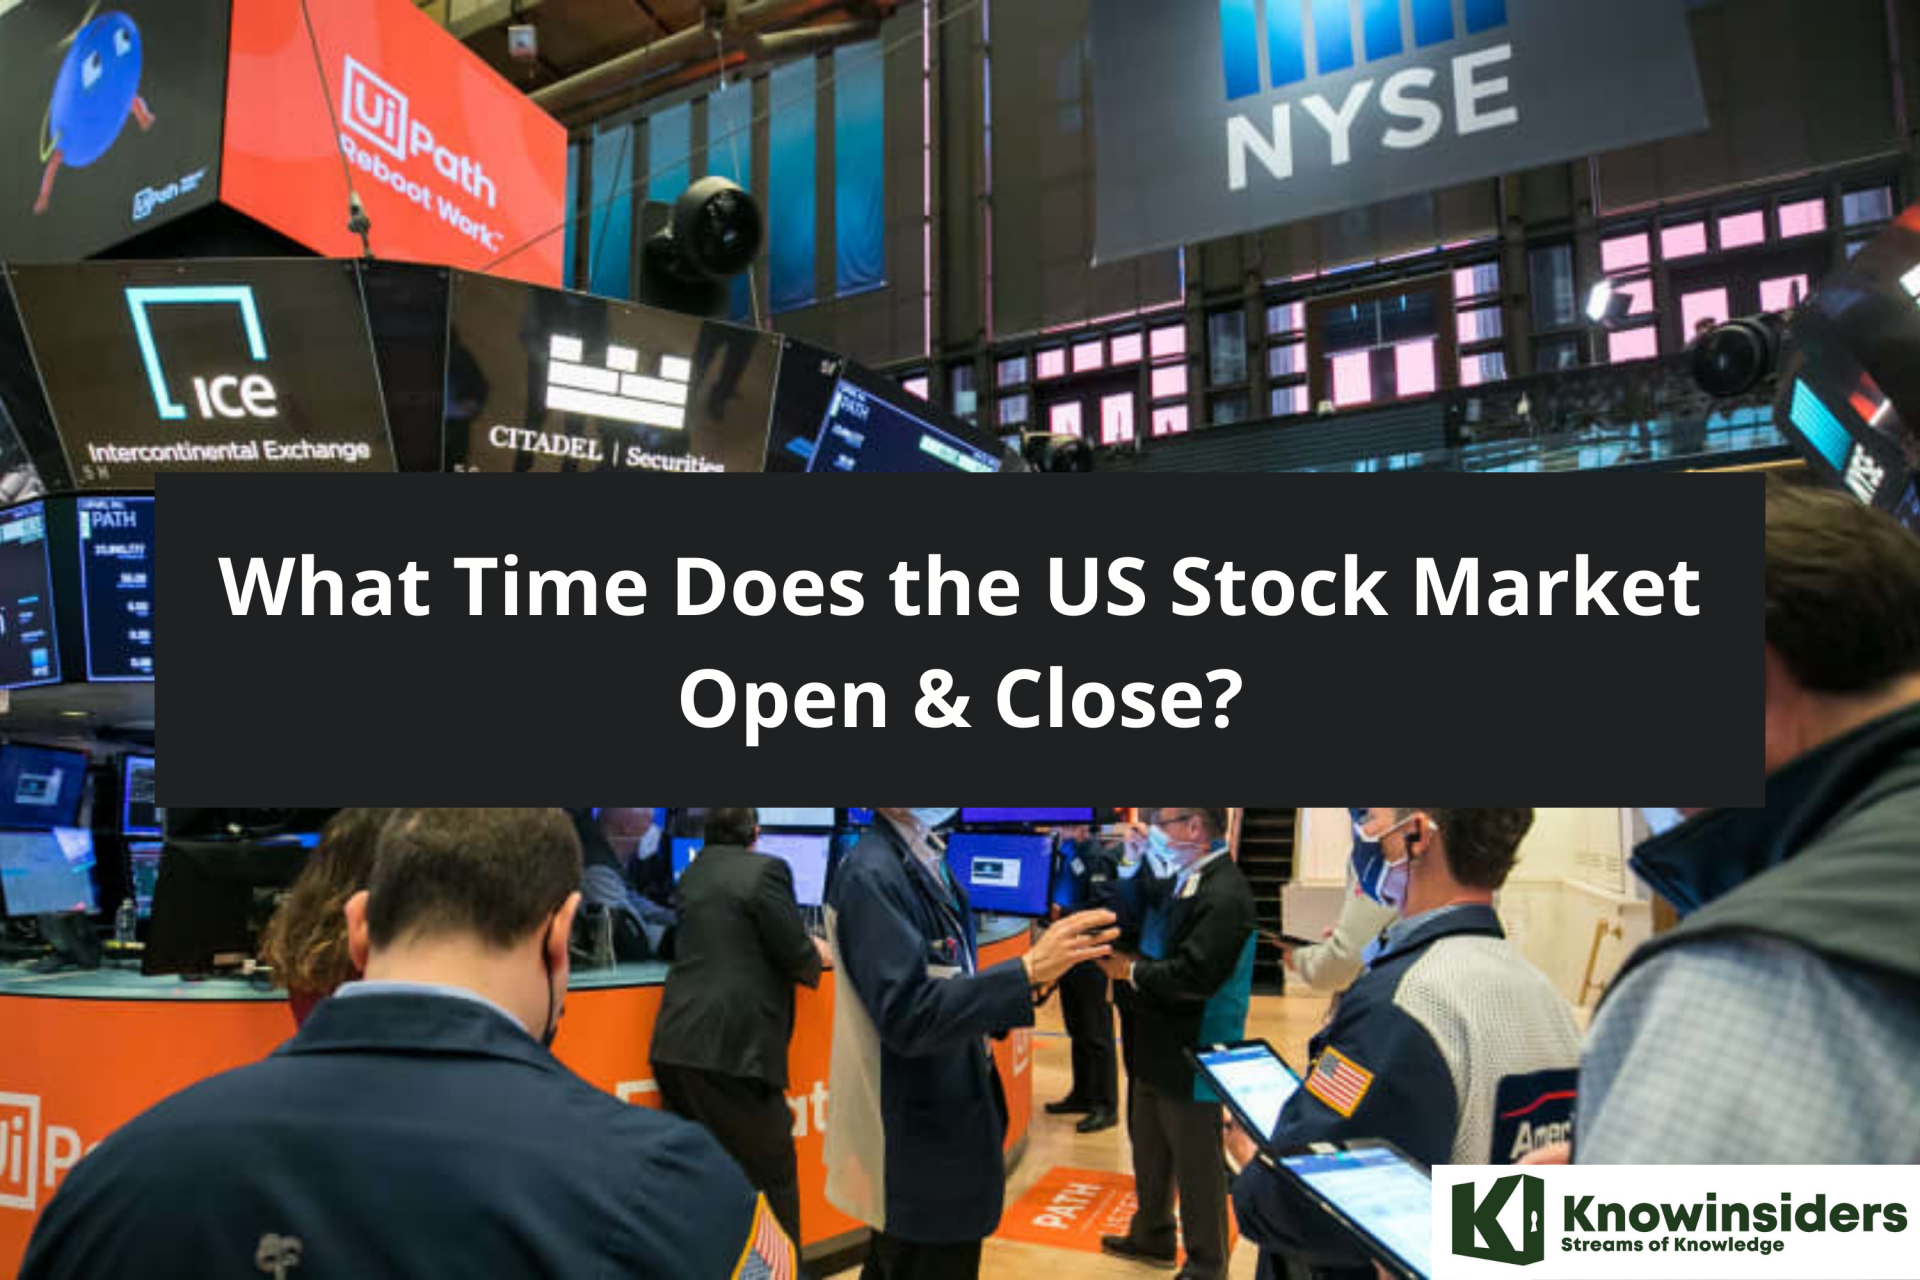 What Time Does the US Stock Market Open and Close?